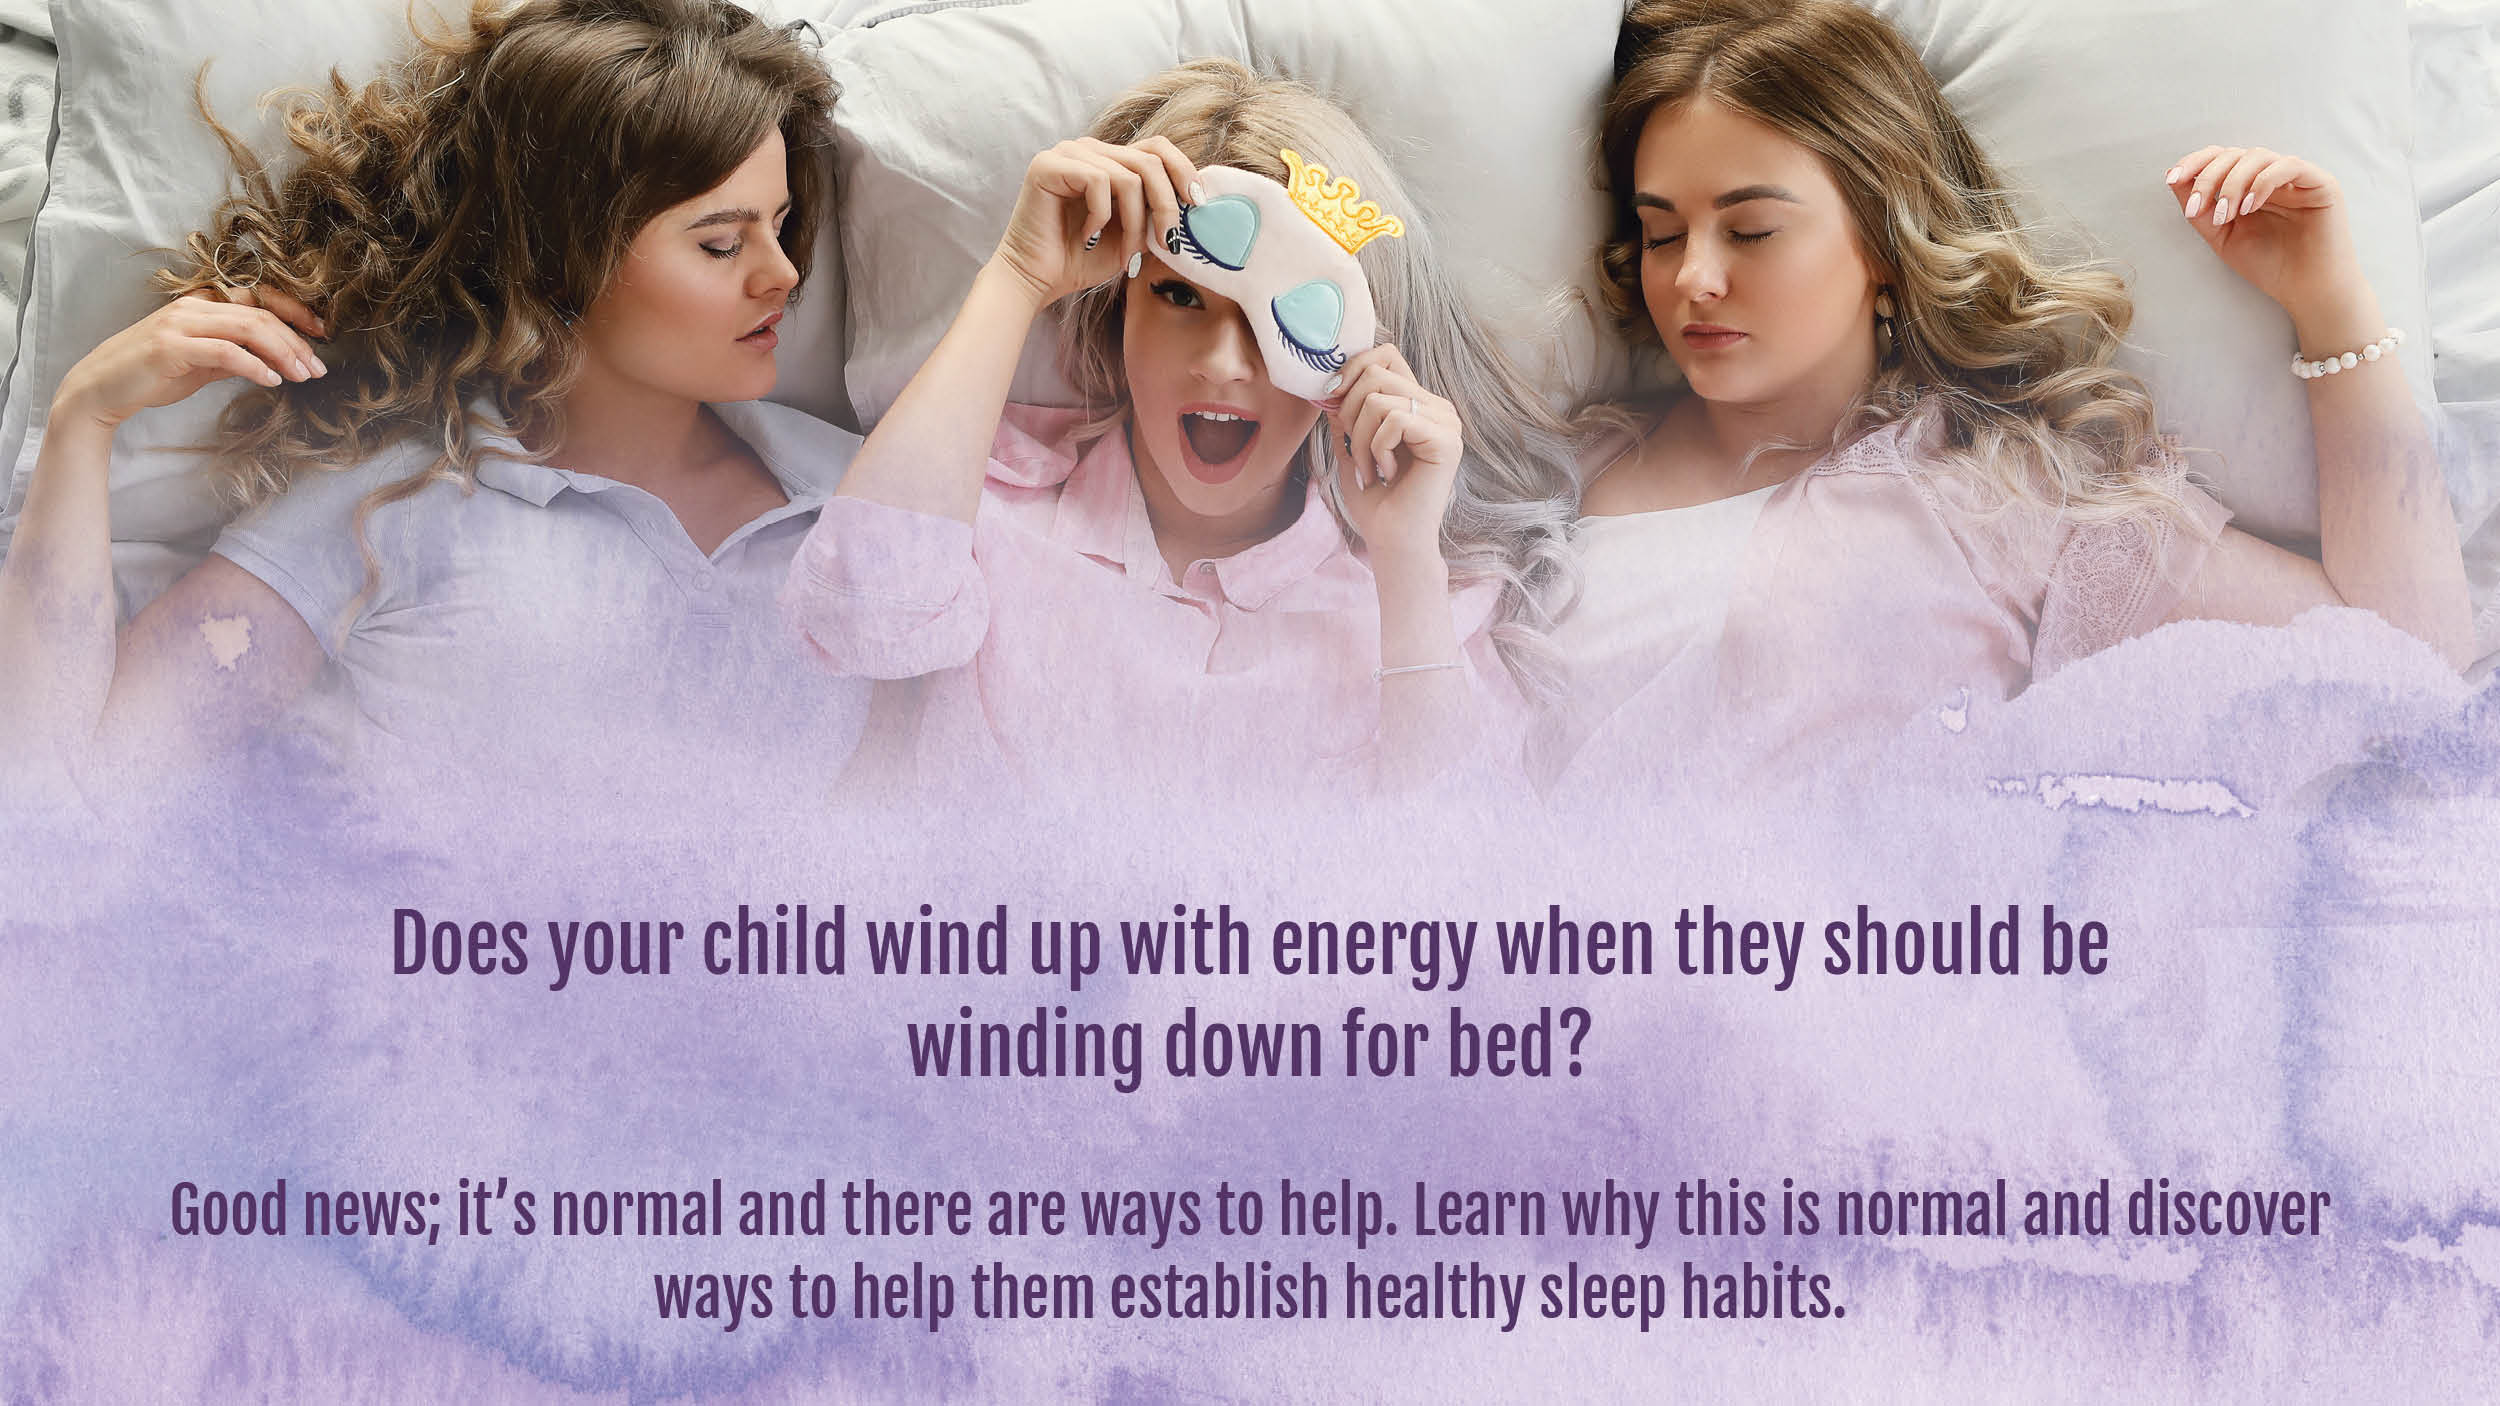 Does your tween/teen wind up with energy when they should be winding down for bed?